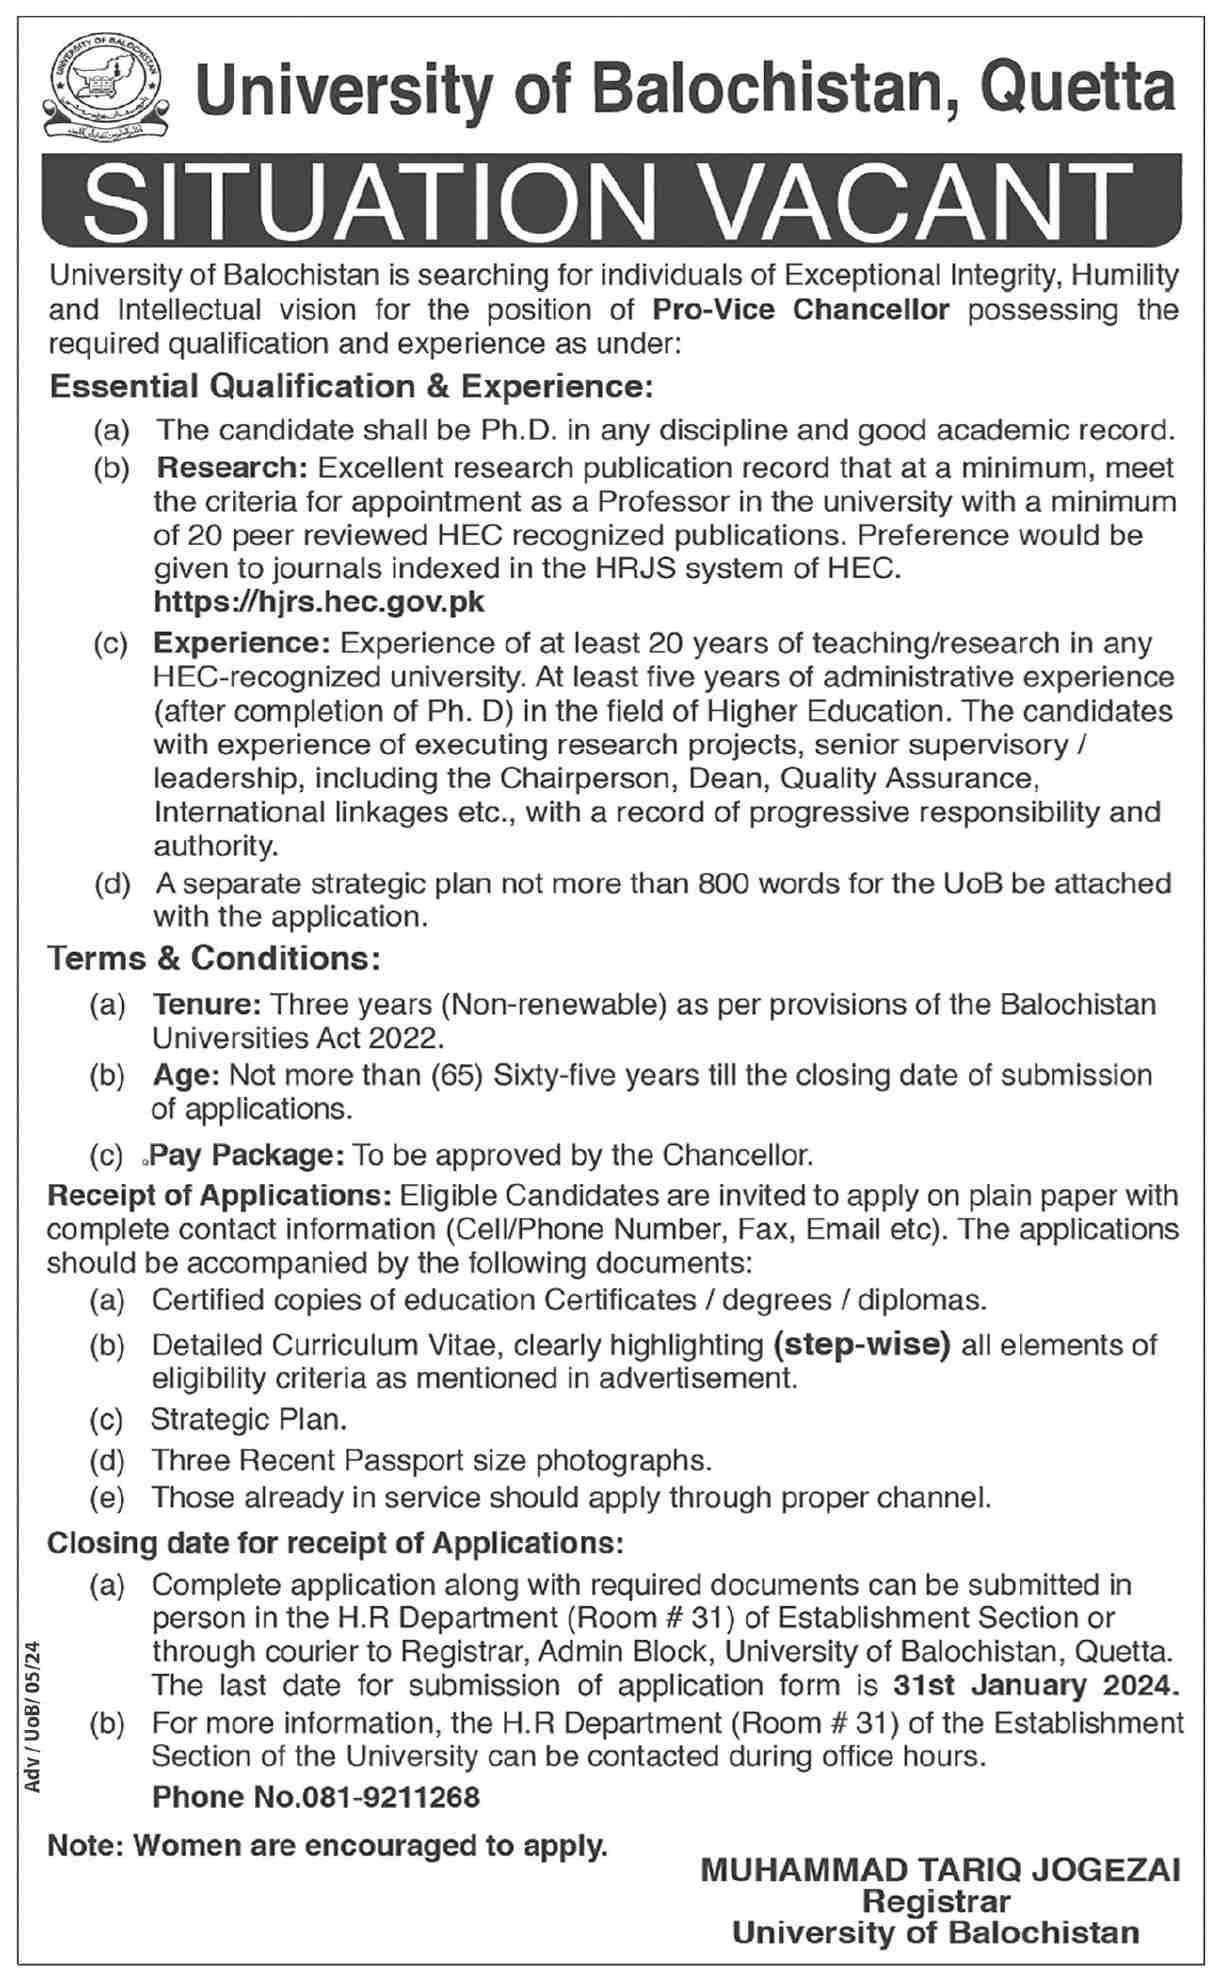 University of Balochistan Quetta Situation Vacant